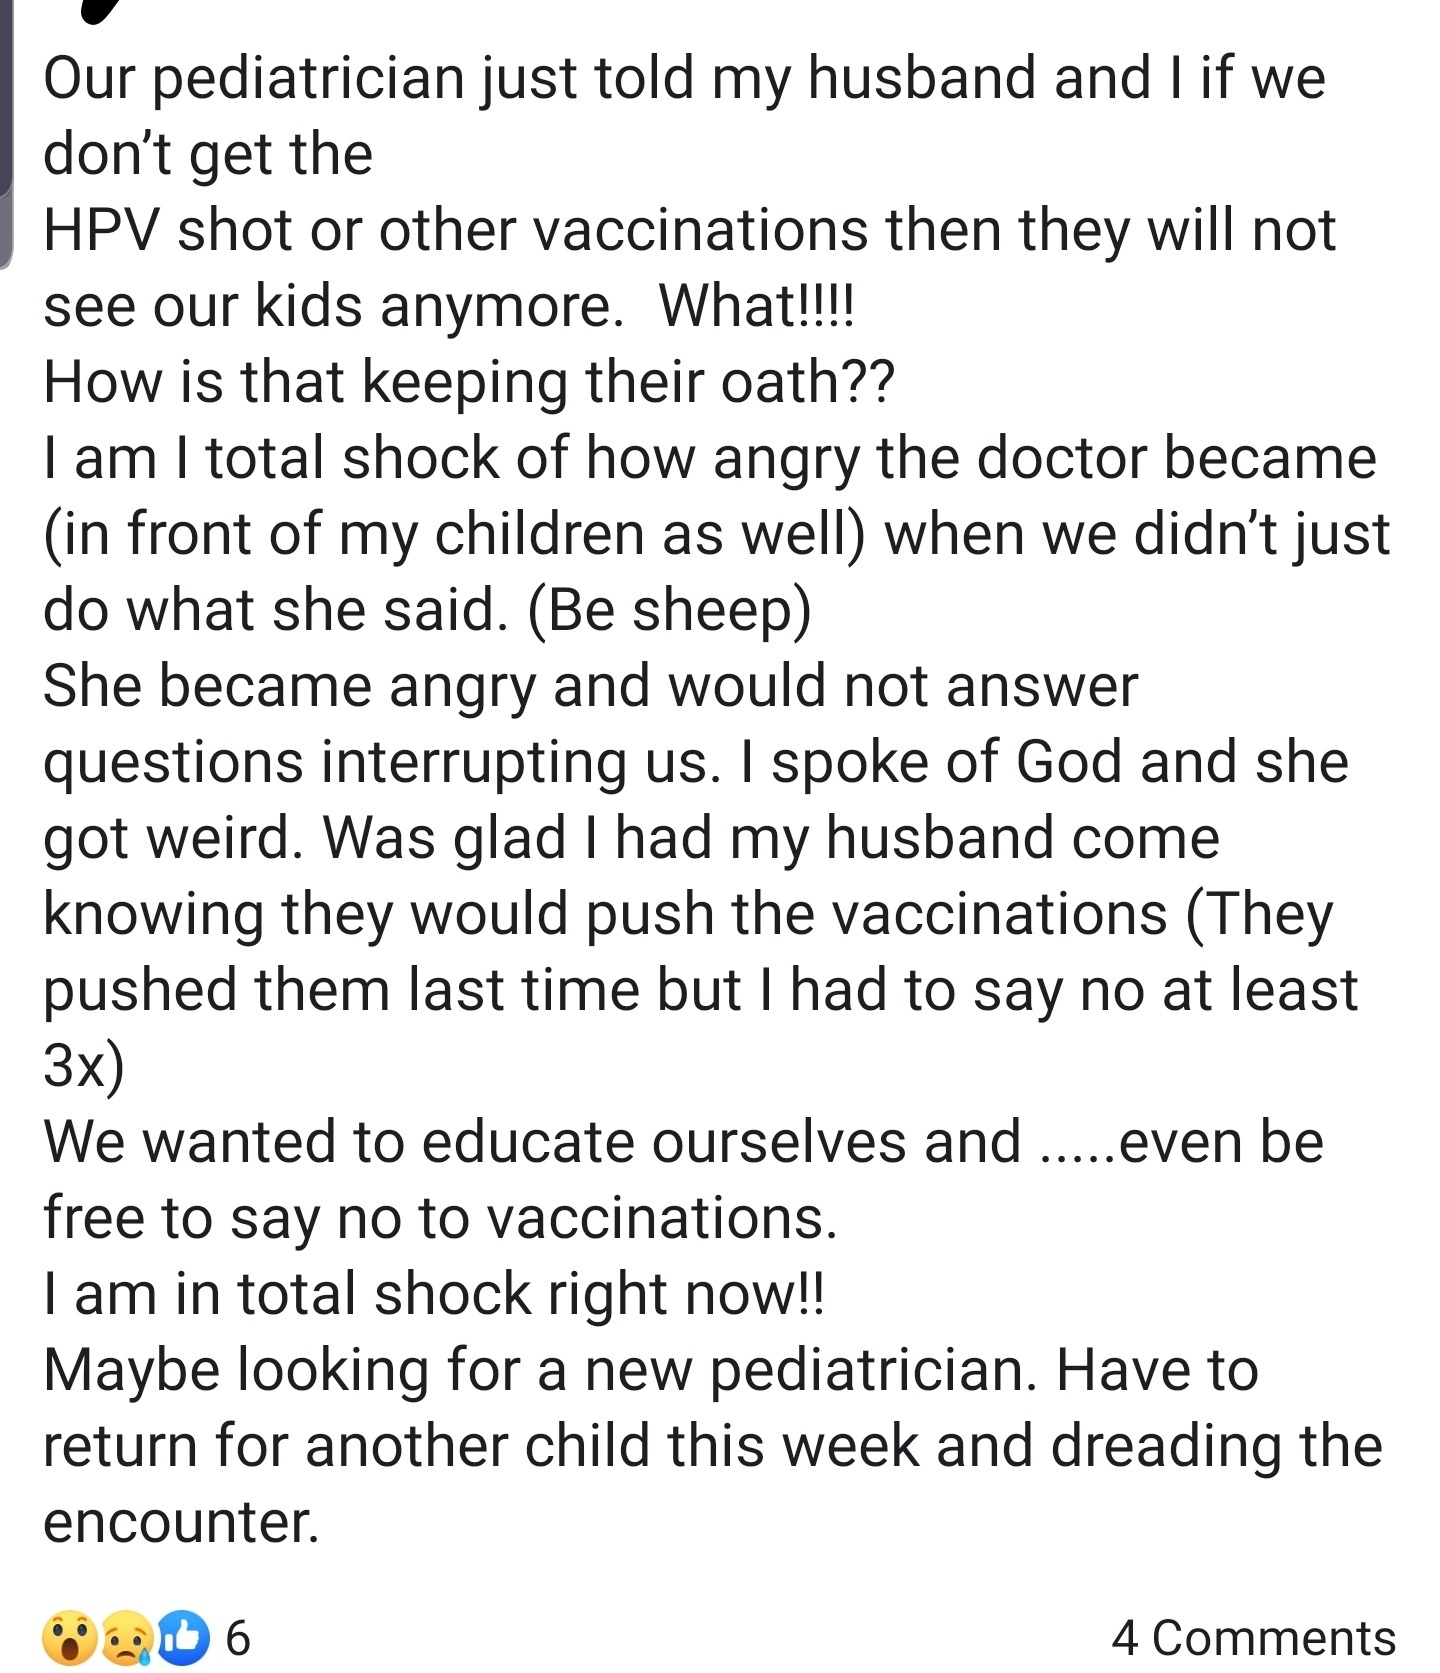 Our pediatrician just told my husband and I if we don't get the Hpv shot or other vaccinations then they will not see our kids anymore. What!!!! How is that keeping their oath?? I am I total shock of how angry the doctor became in front of my c